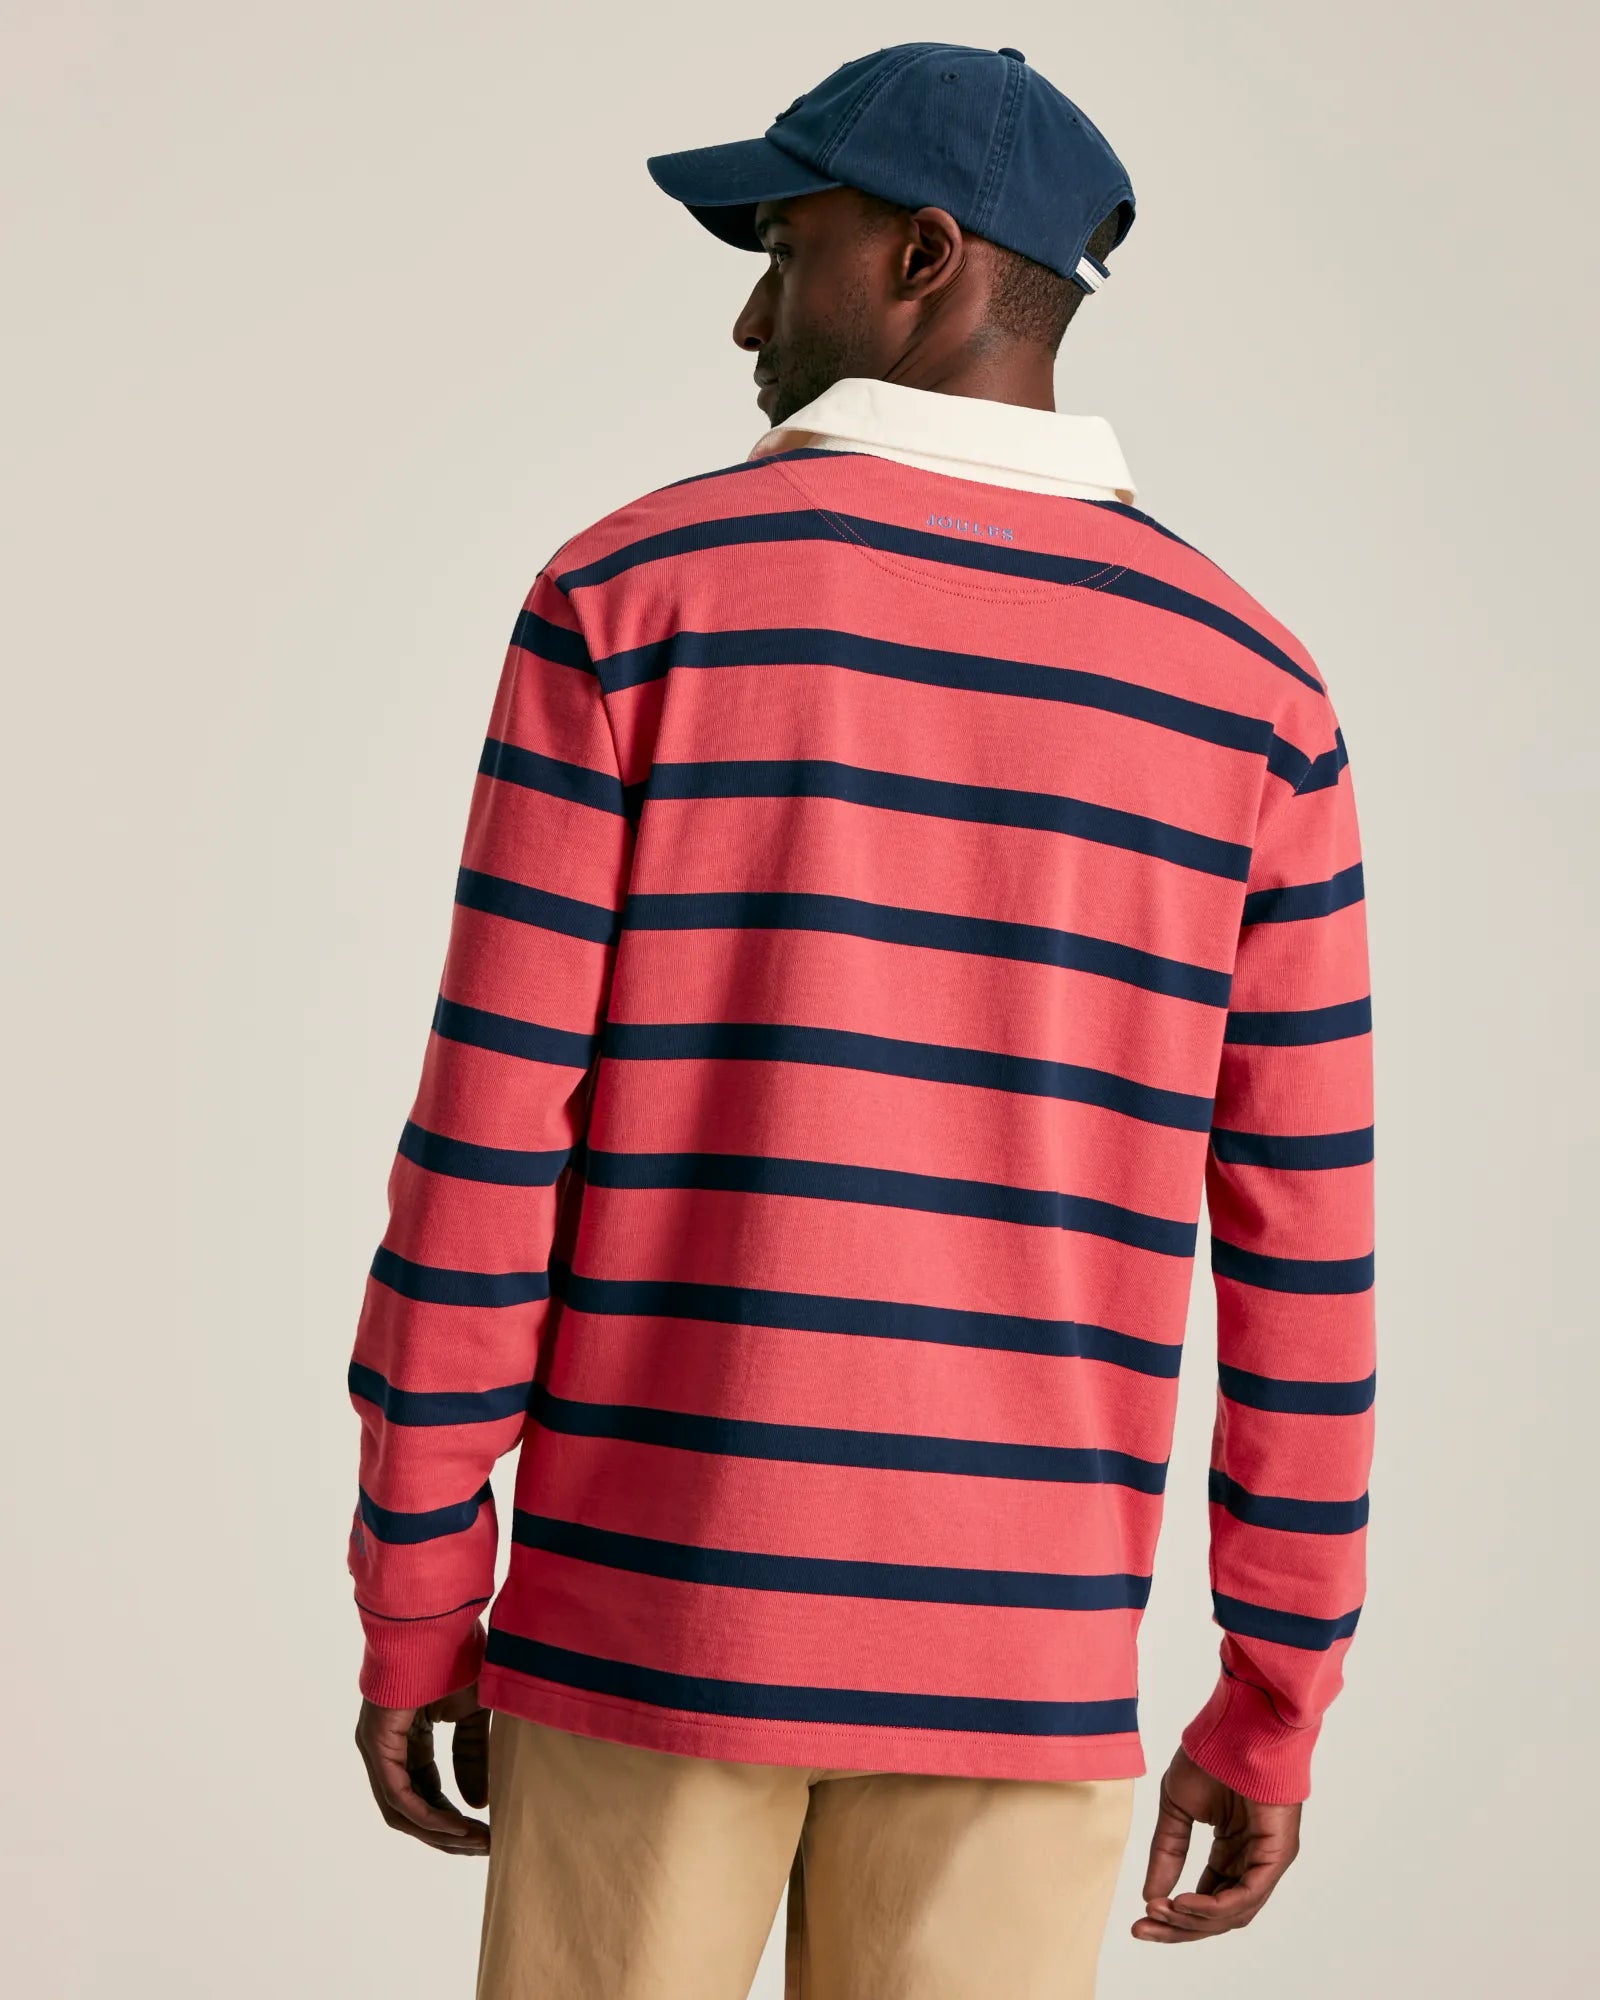 Onside Pink/Navy Striped Rugby Shirt